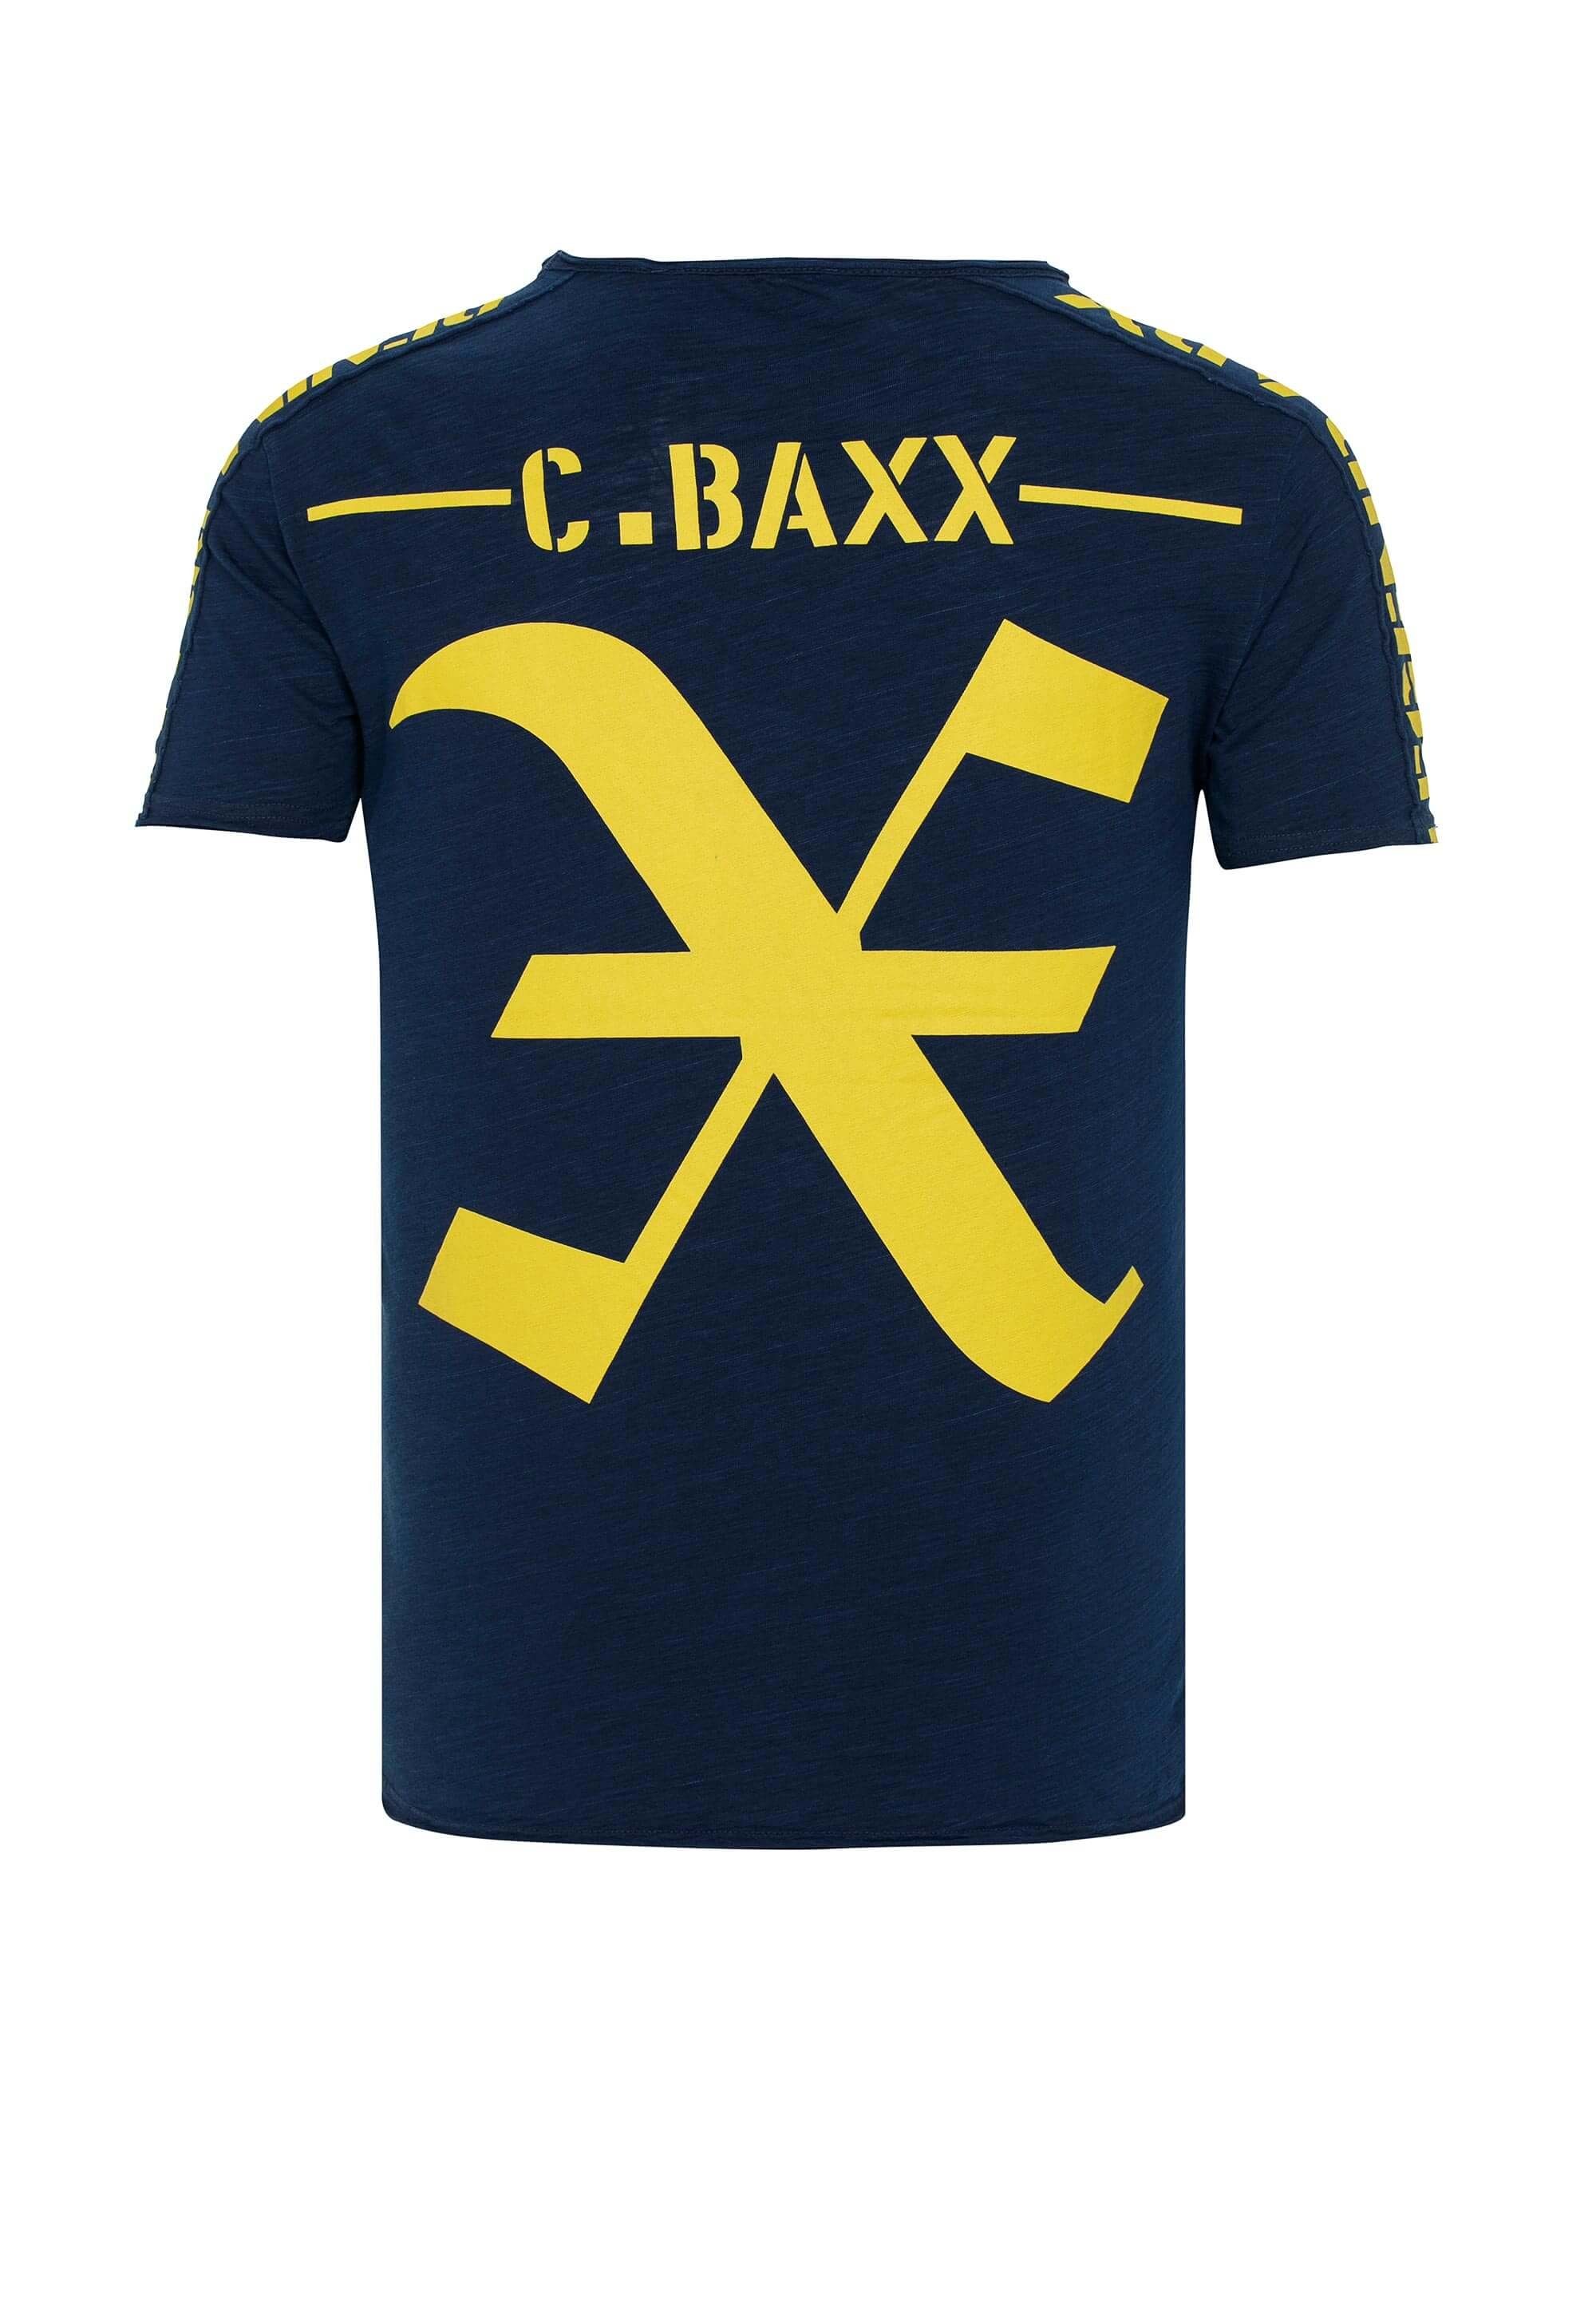 Baxx Cipo & im Relaxed-Fit T-Shirt